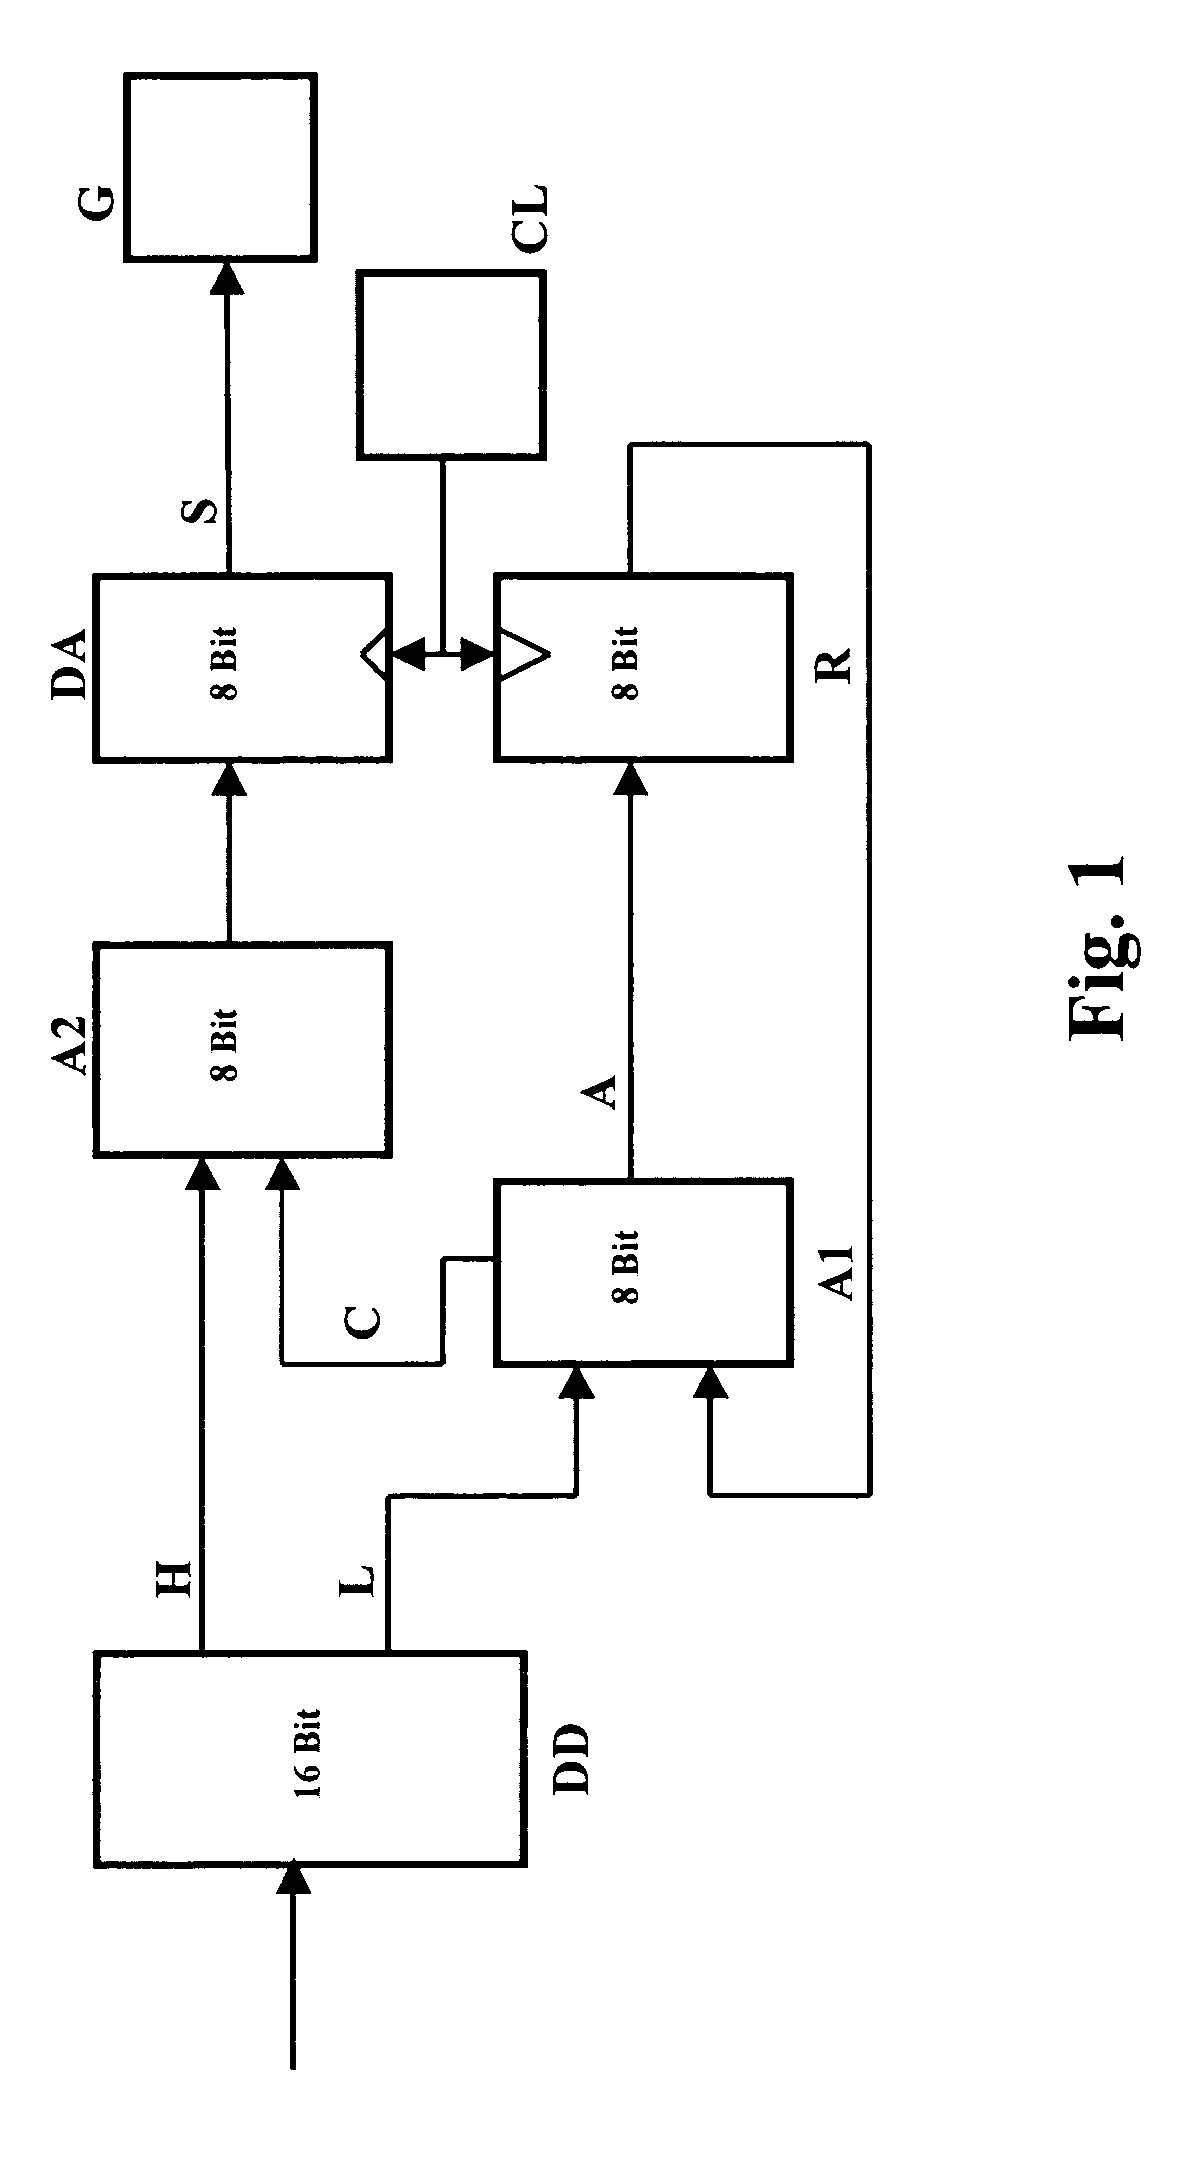 Recording or reproduction apparatus for optical recording media having means for increasing the resolution of a digital-to-analog converter in the servo regulating circuit